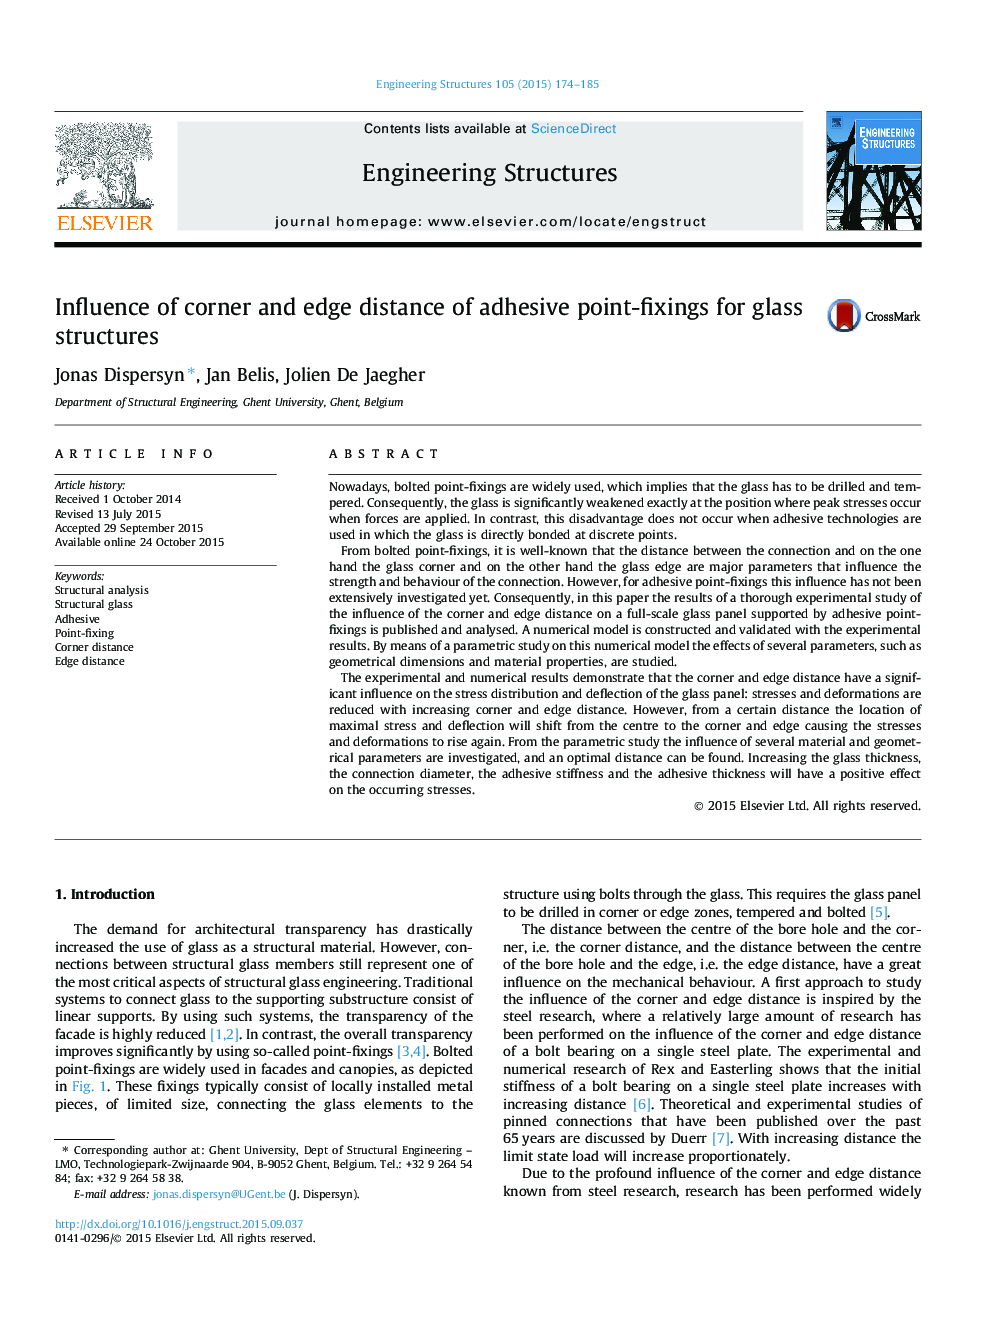 Influence of corner and edge distance of adhesive point-fixings for glass structures